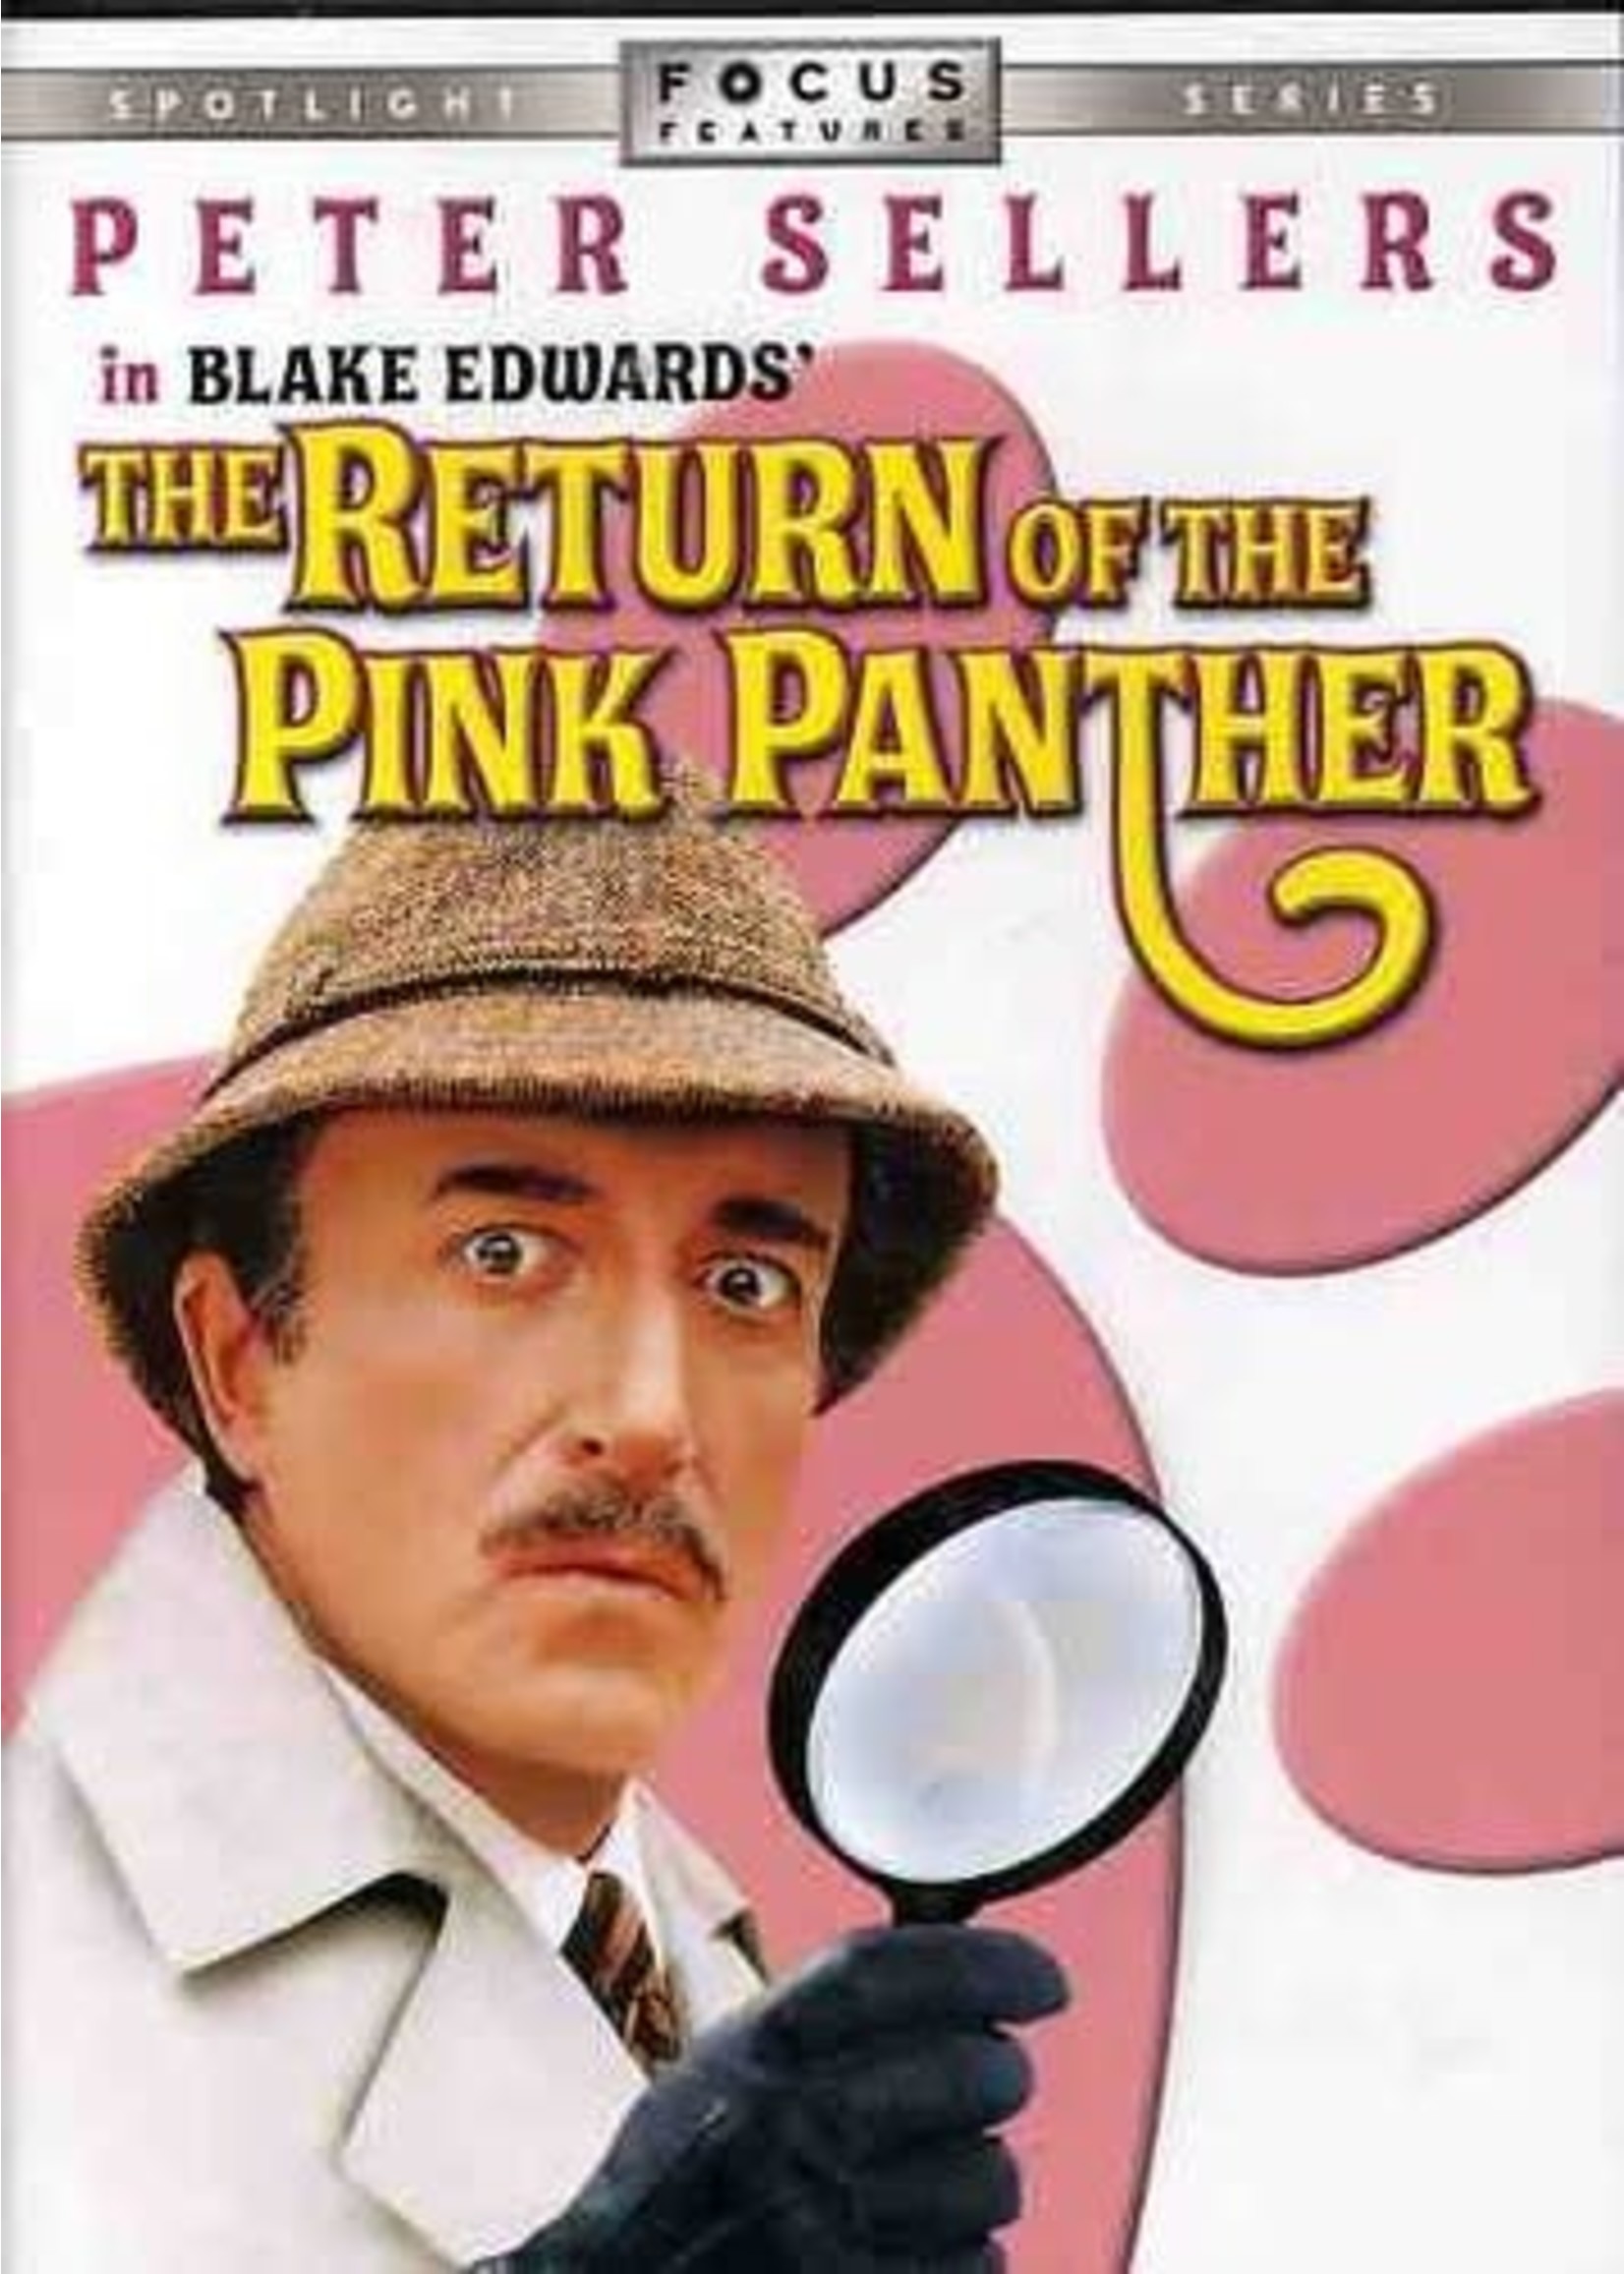 The Return of the Pink Panther DVD